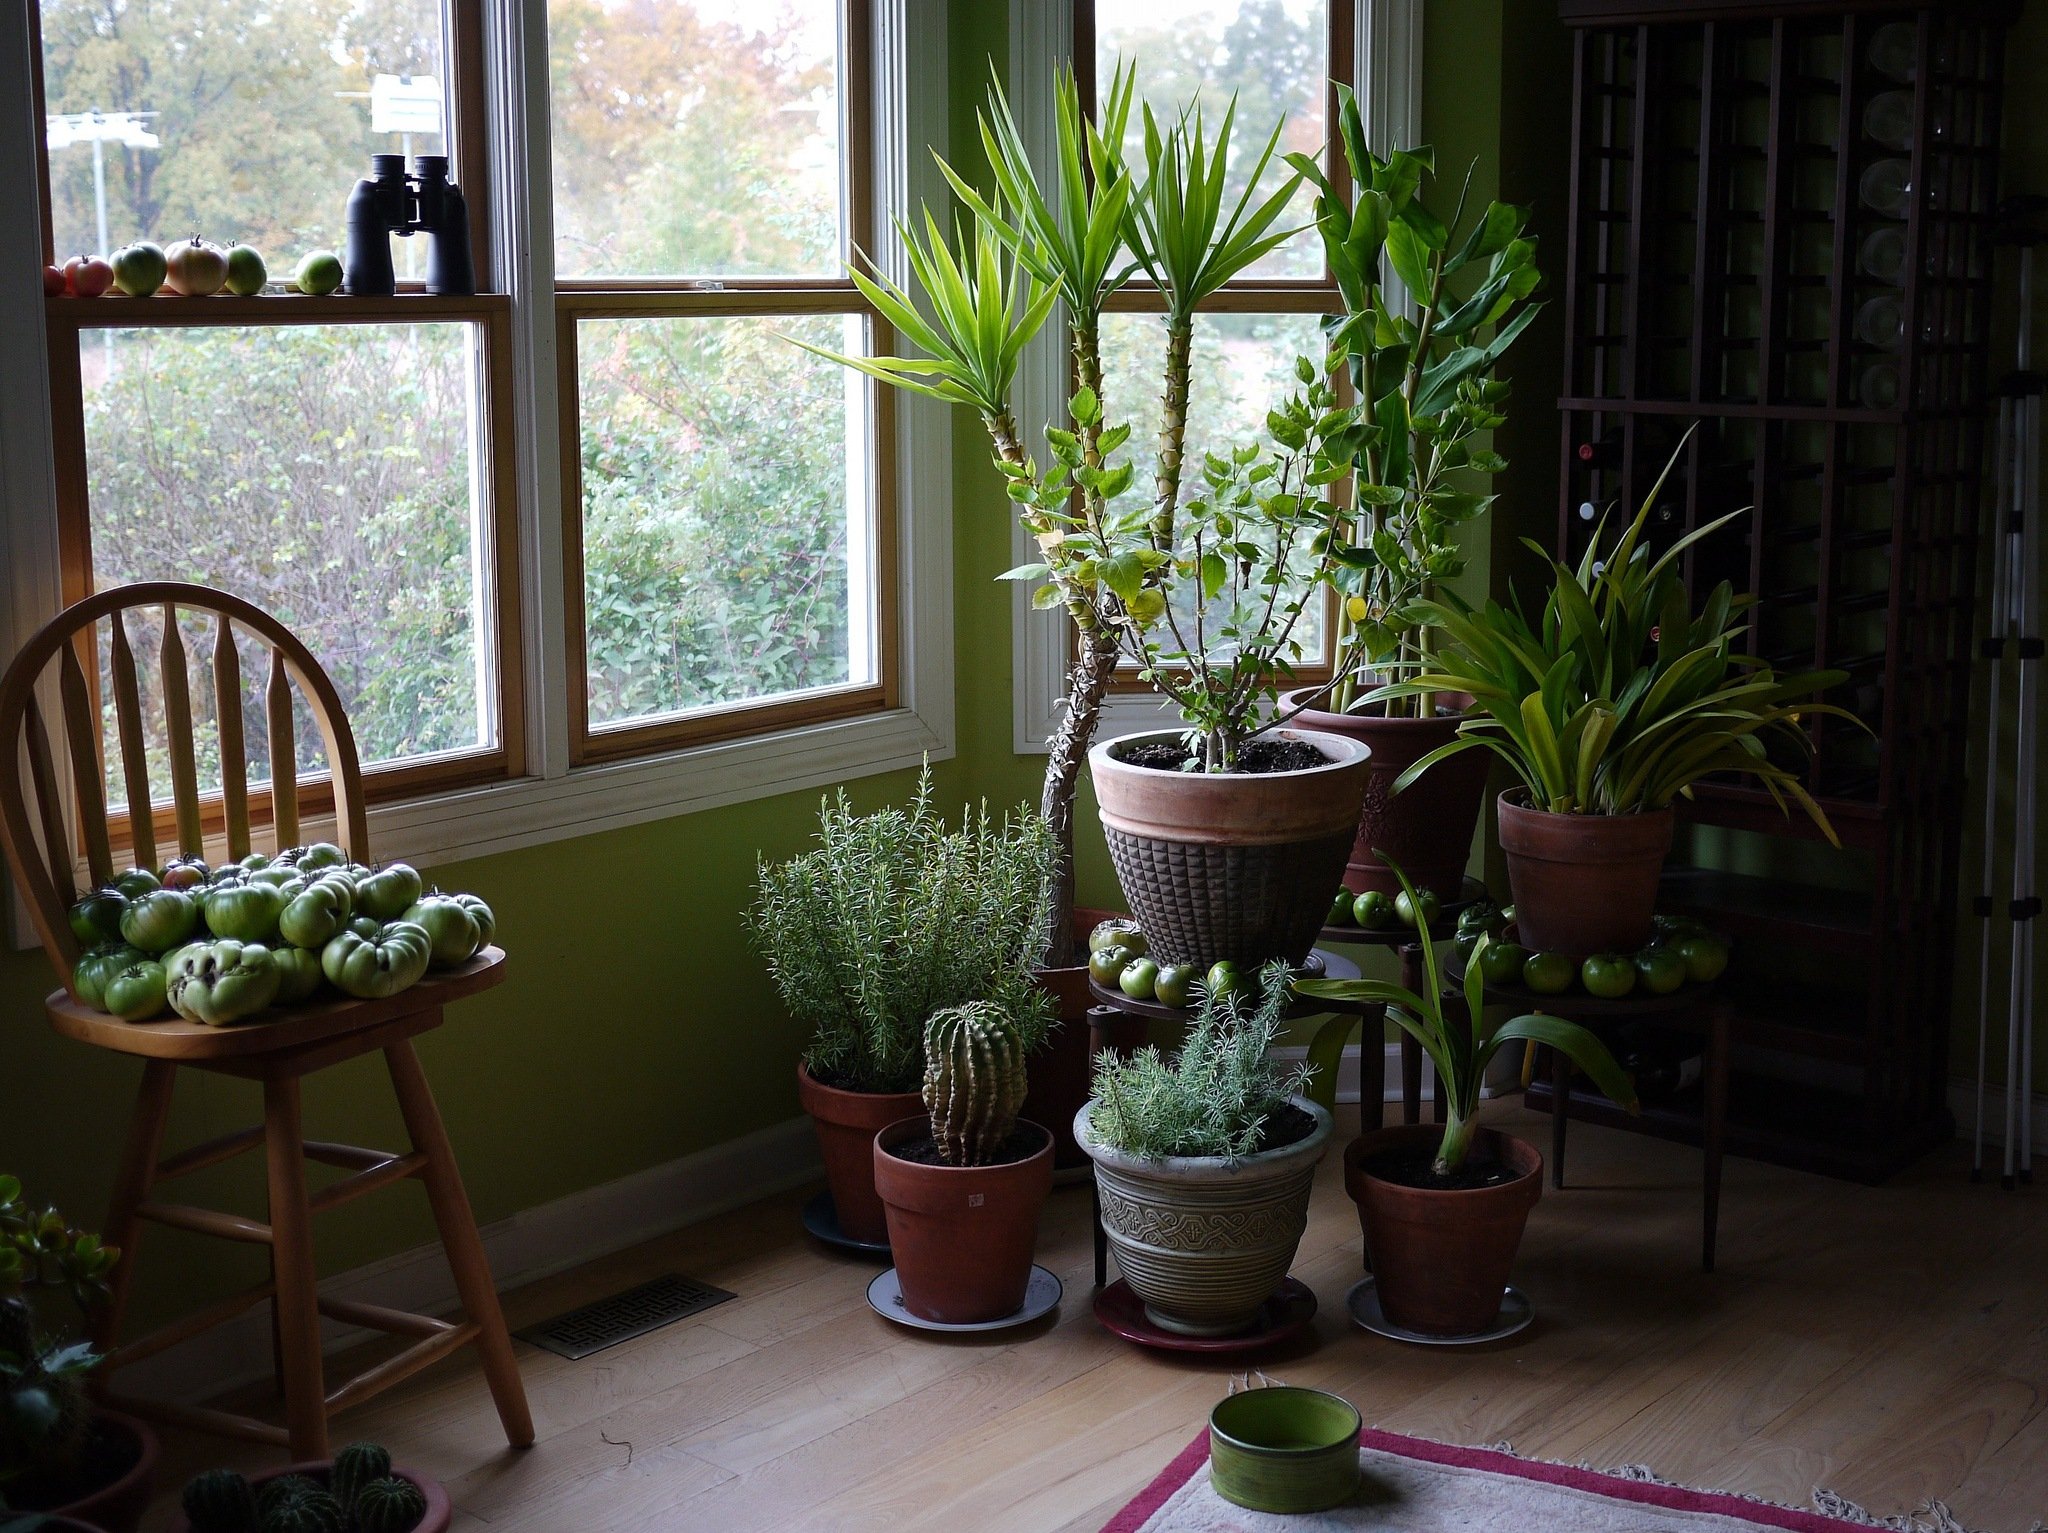 15 Houseplants That Clean The Air And Are Almost Impossible To Kill